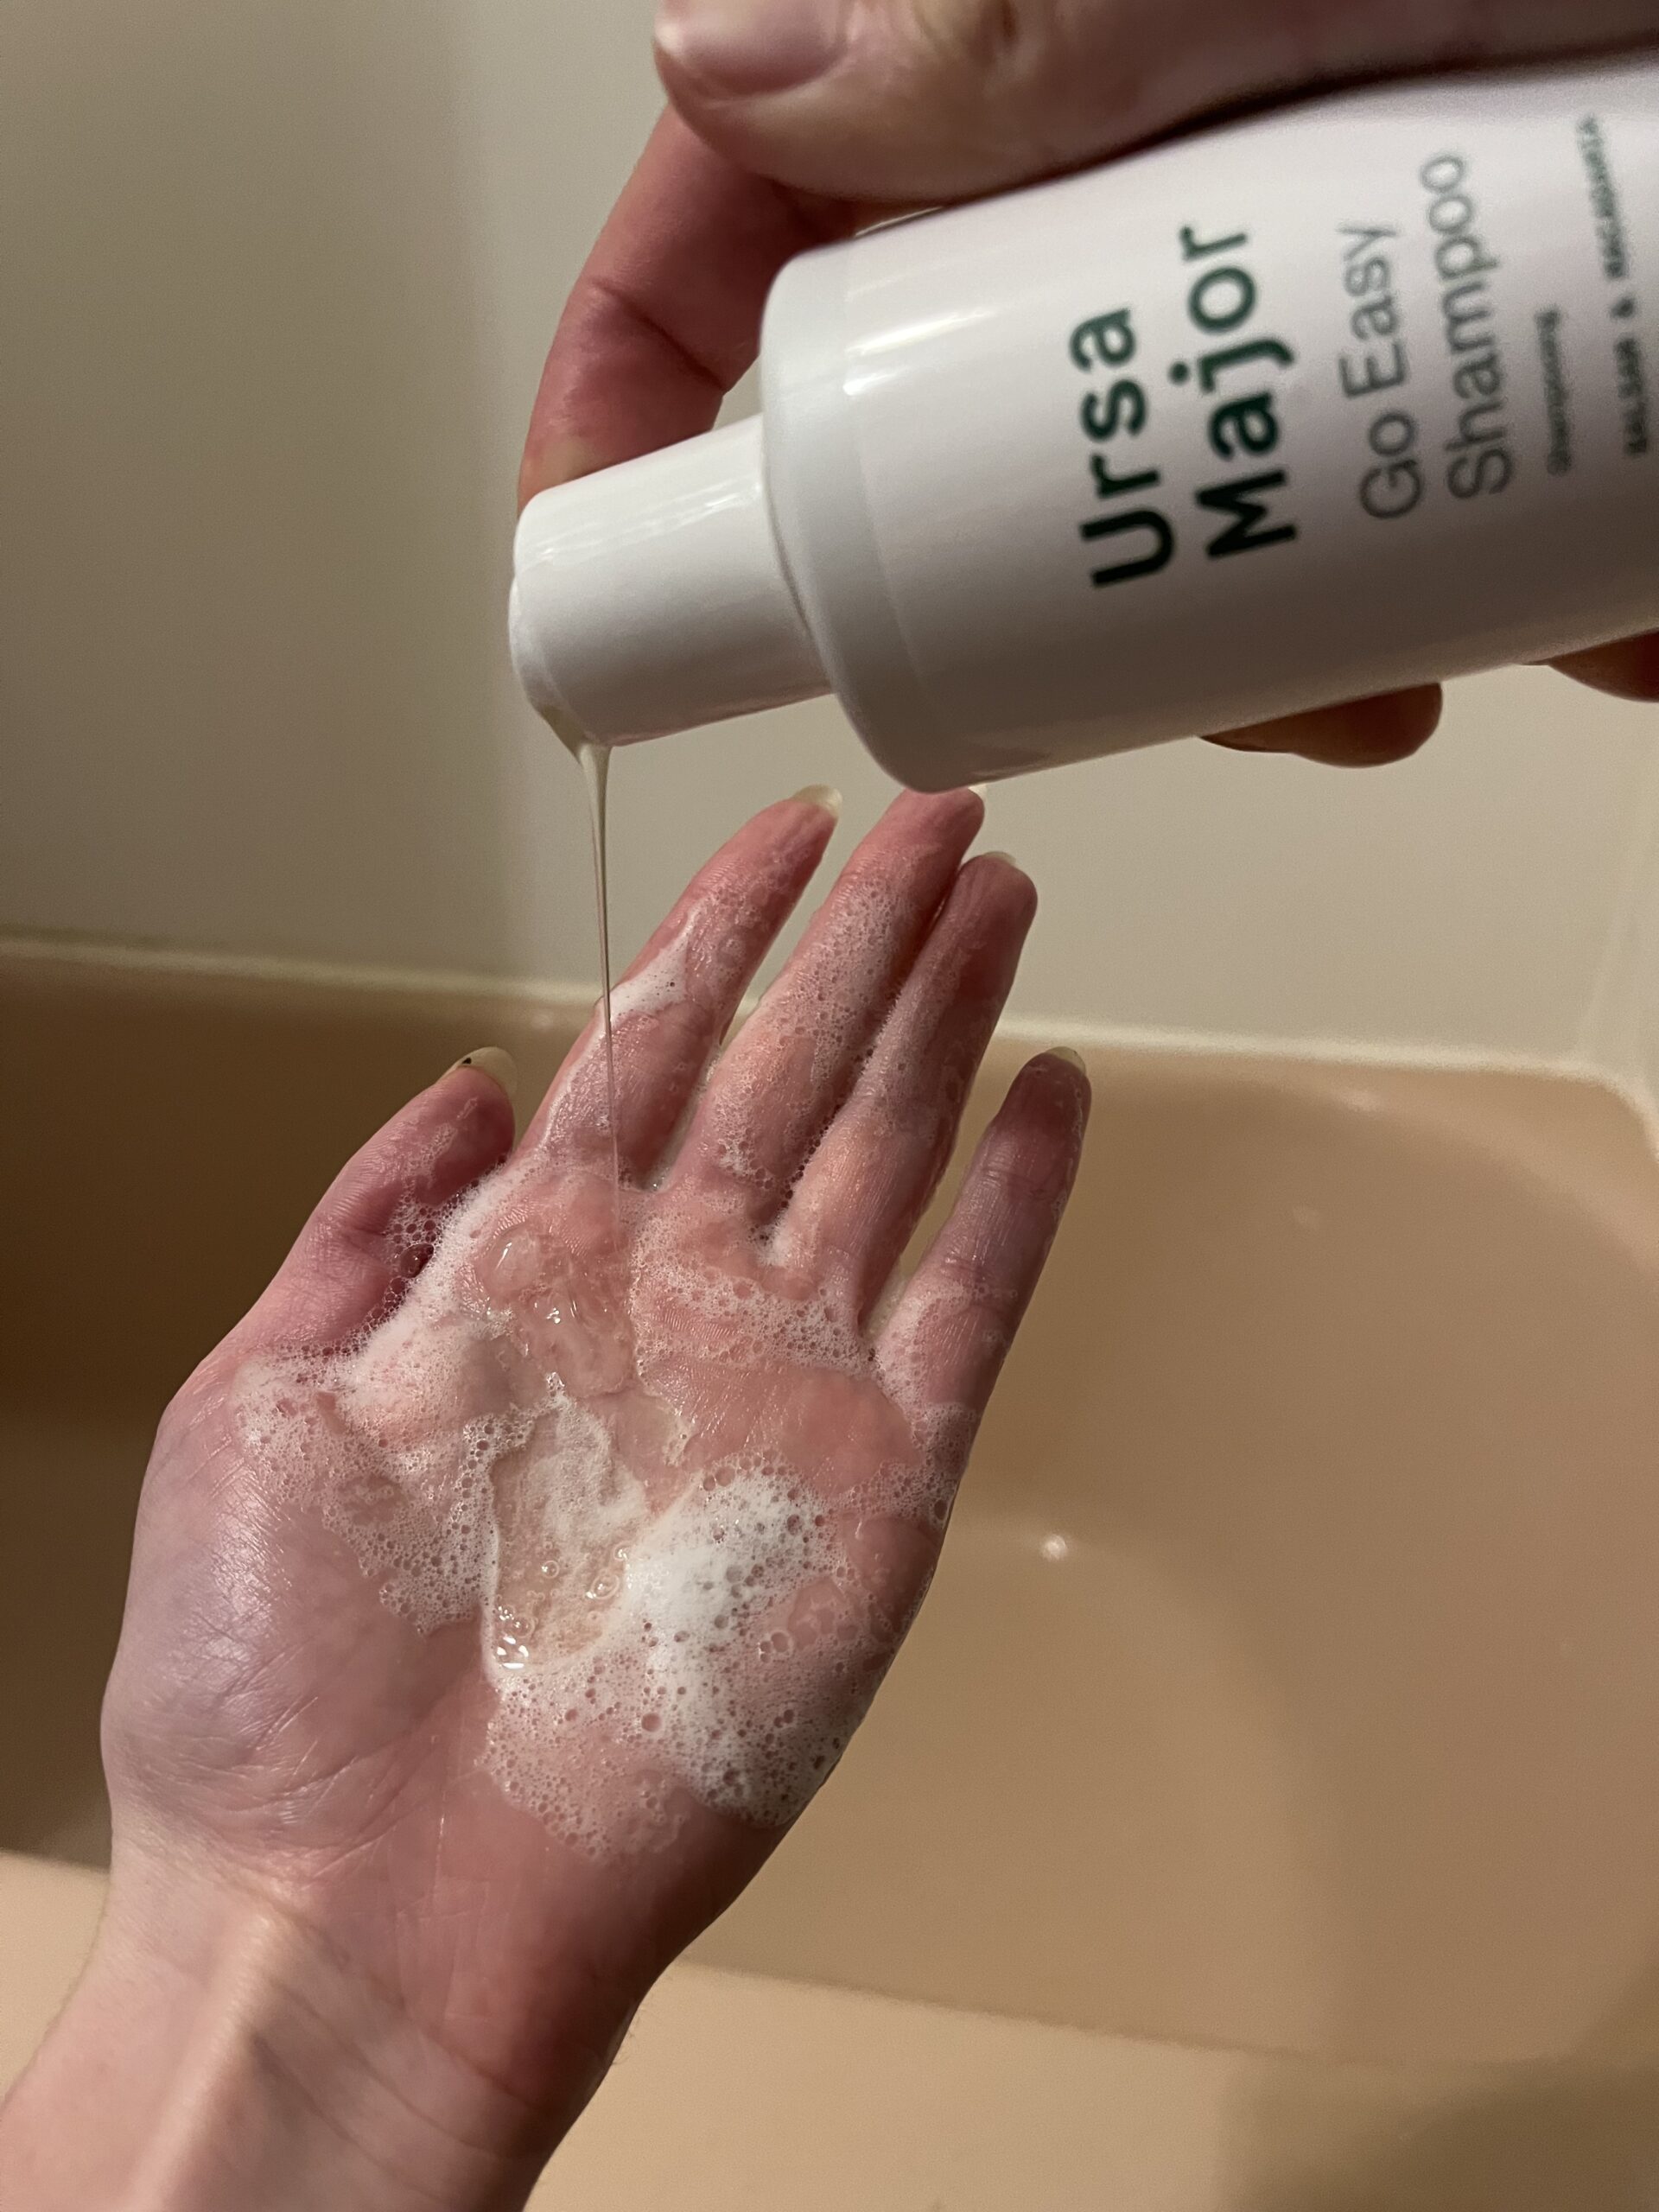 Dispensing shampoo from a bottle onto a palm, creating a foamy lather.